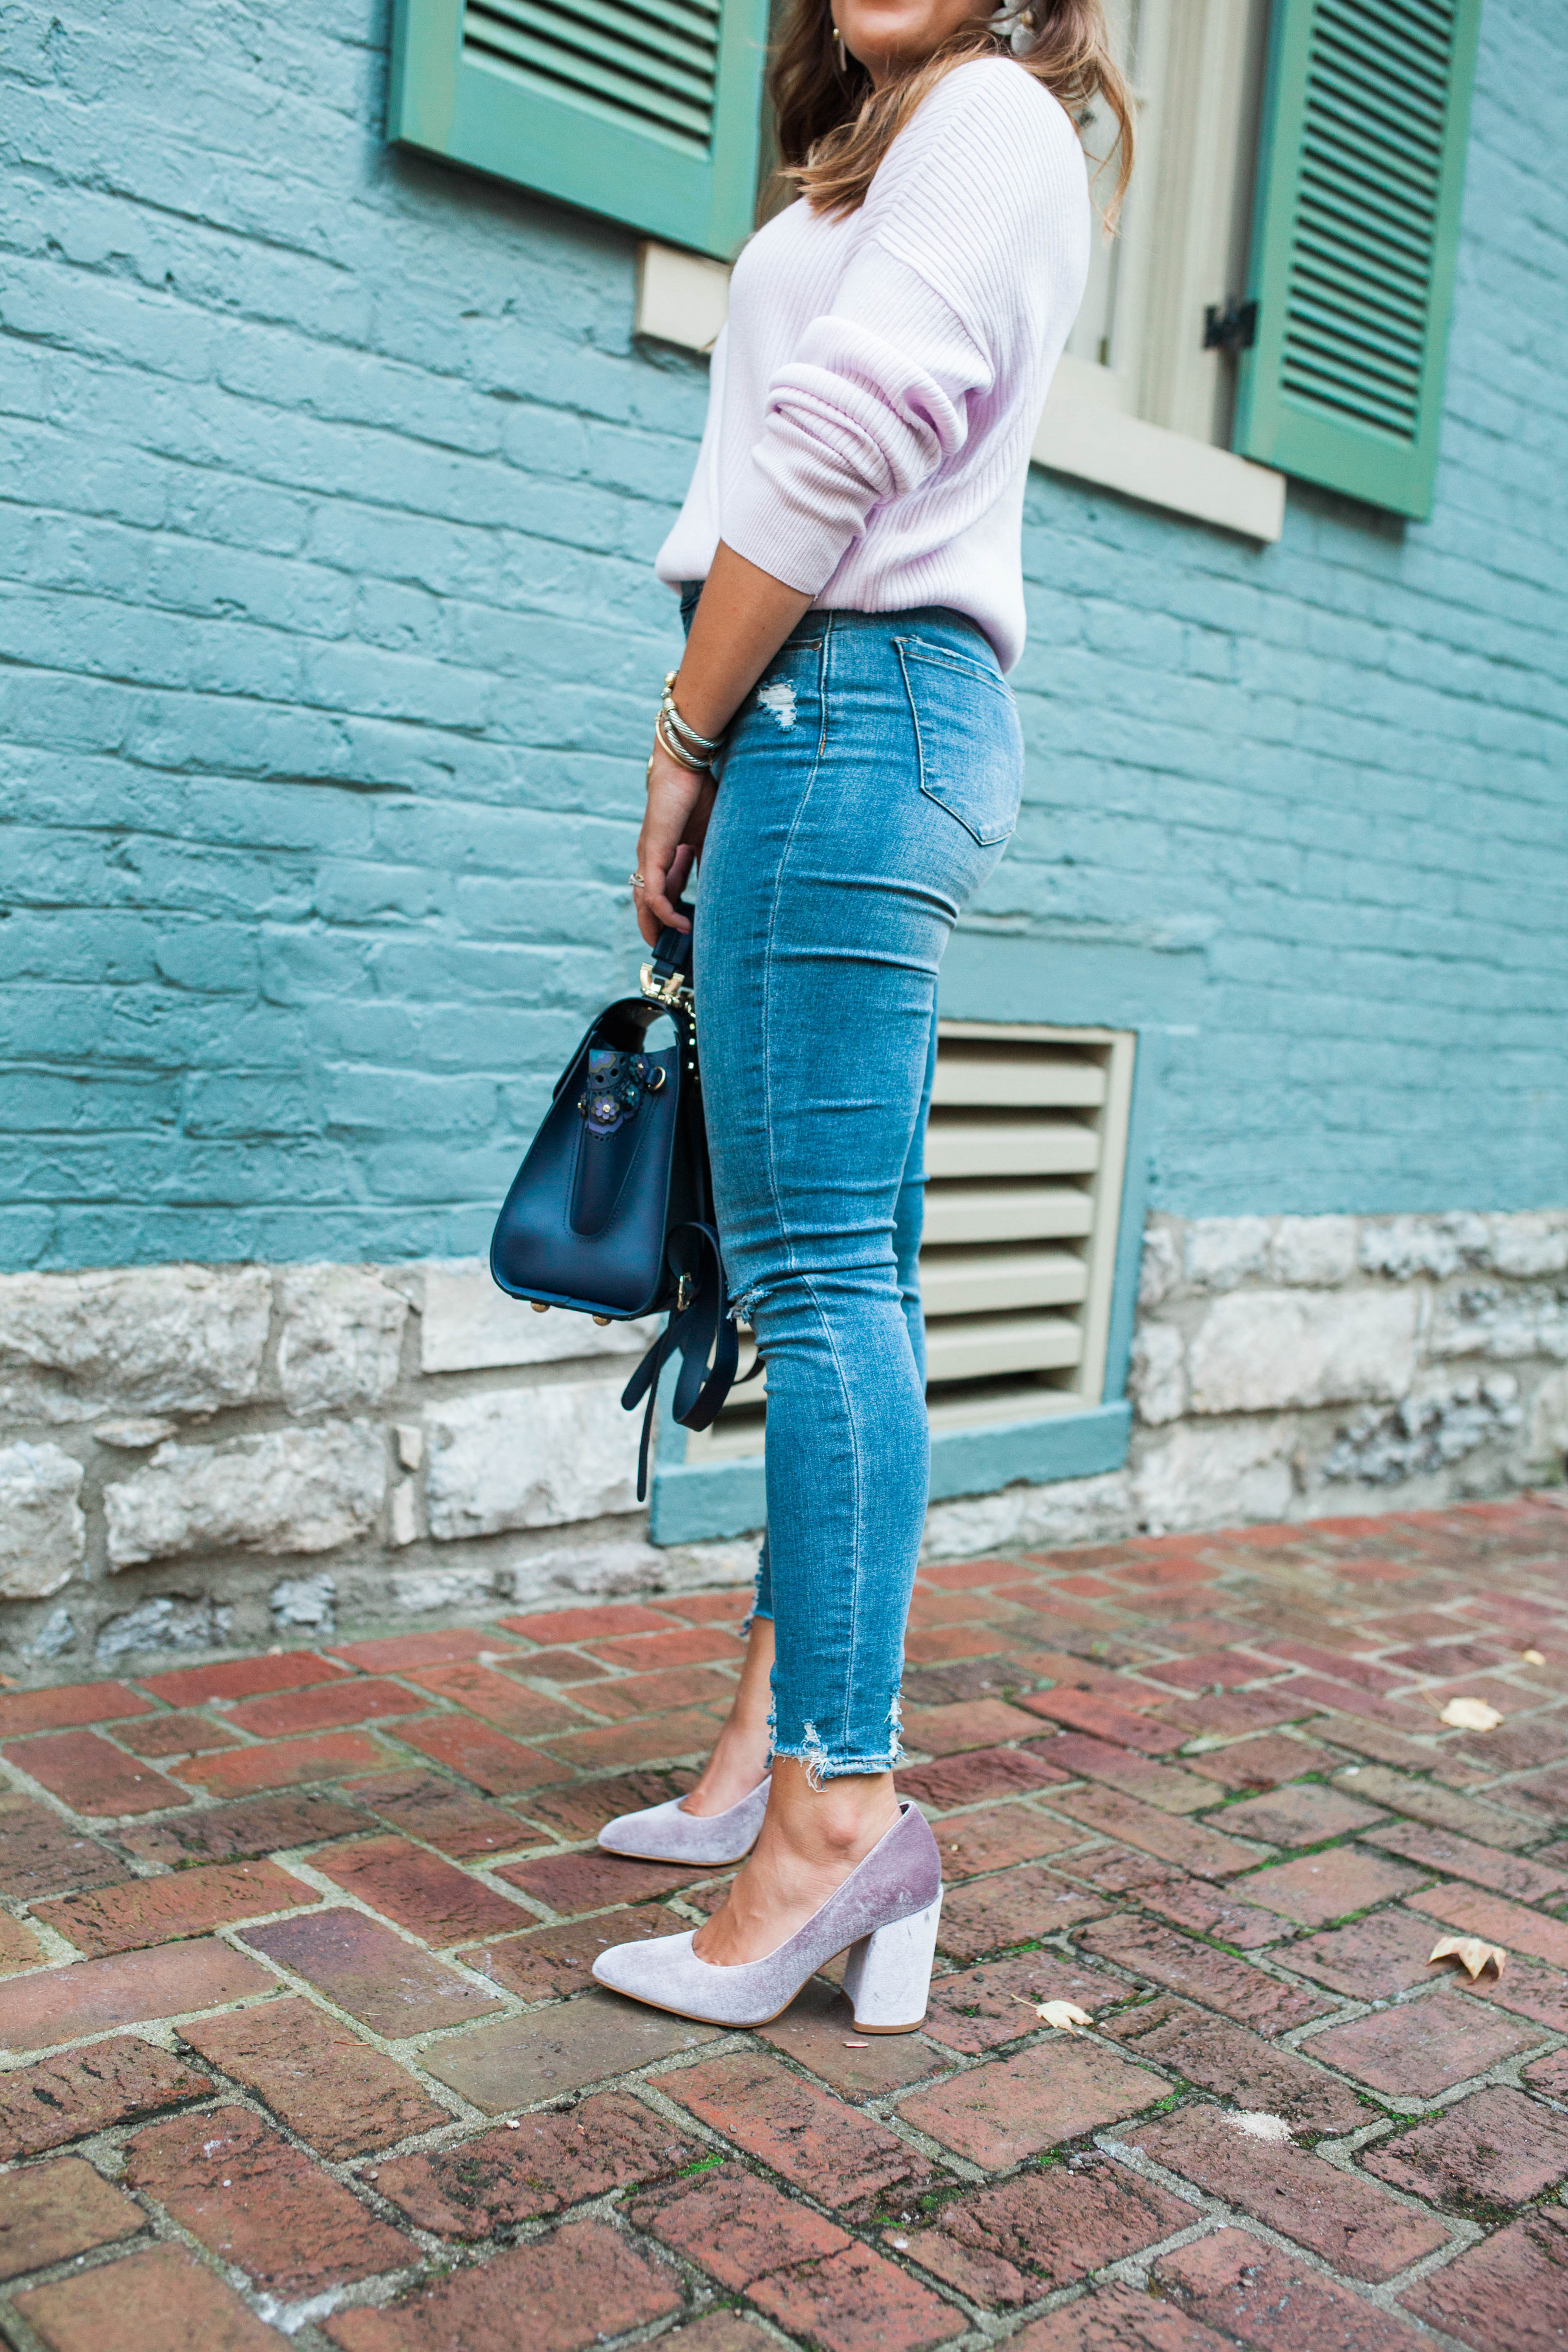 The BEST Shoes From The Nordstrom Sale